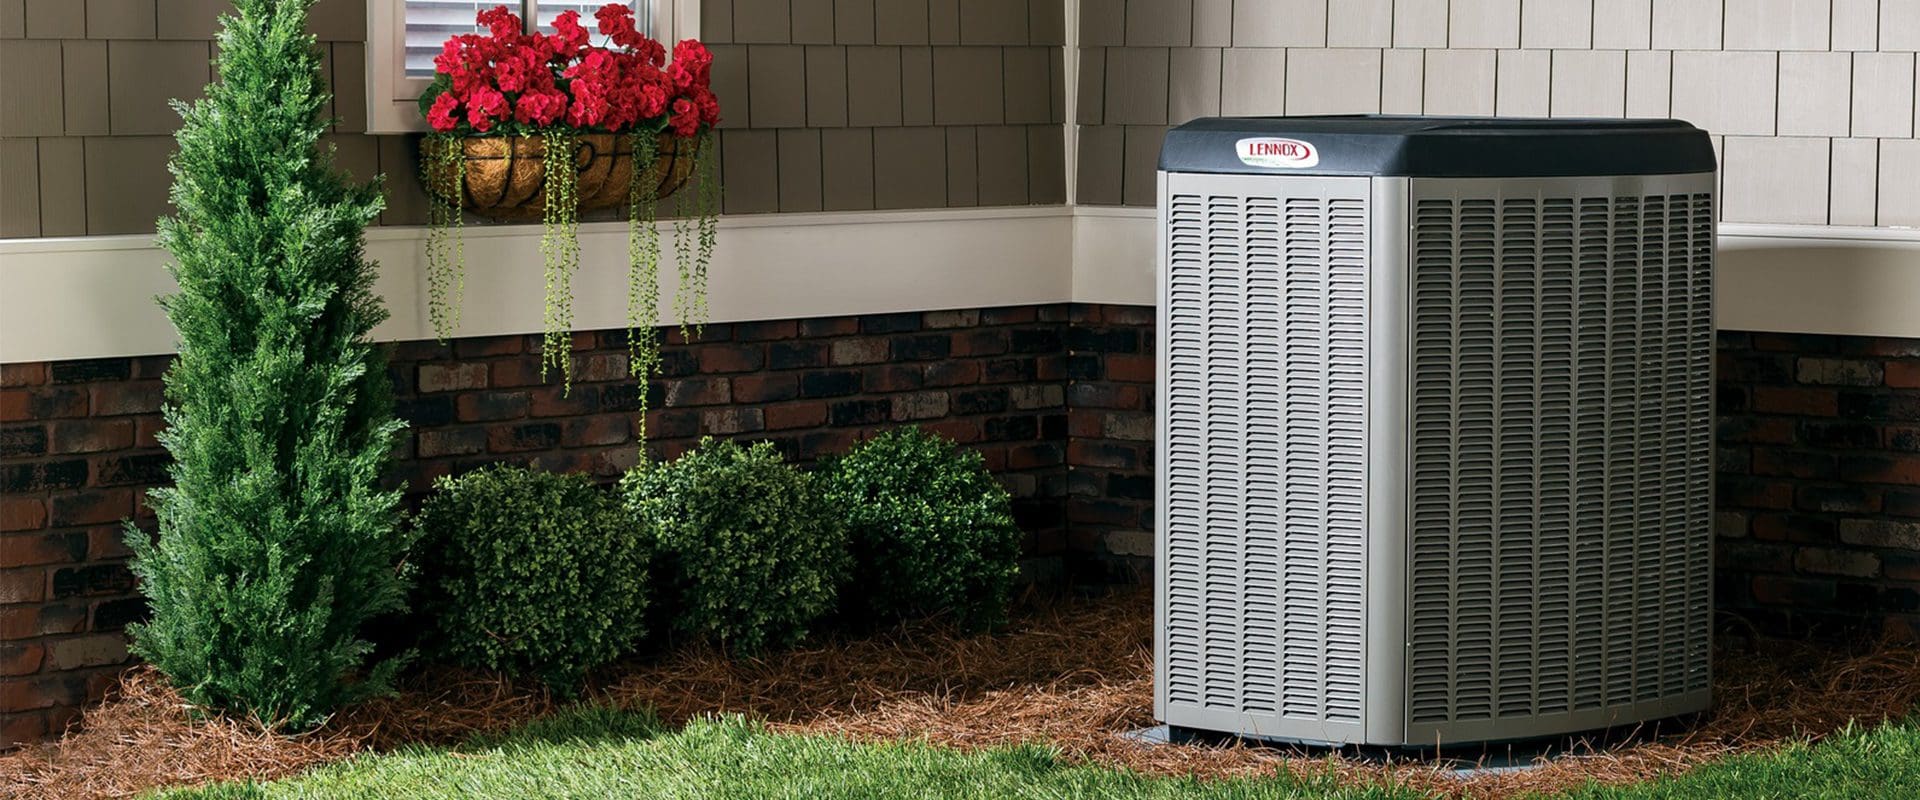 Lennox heating and cooling system outside a residential area